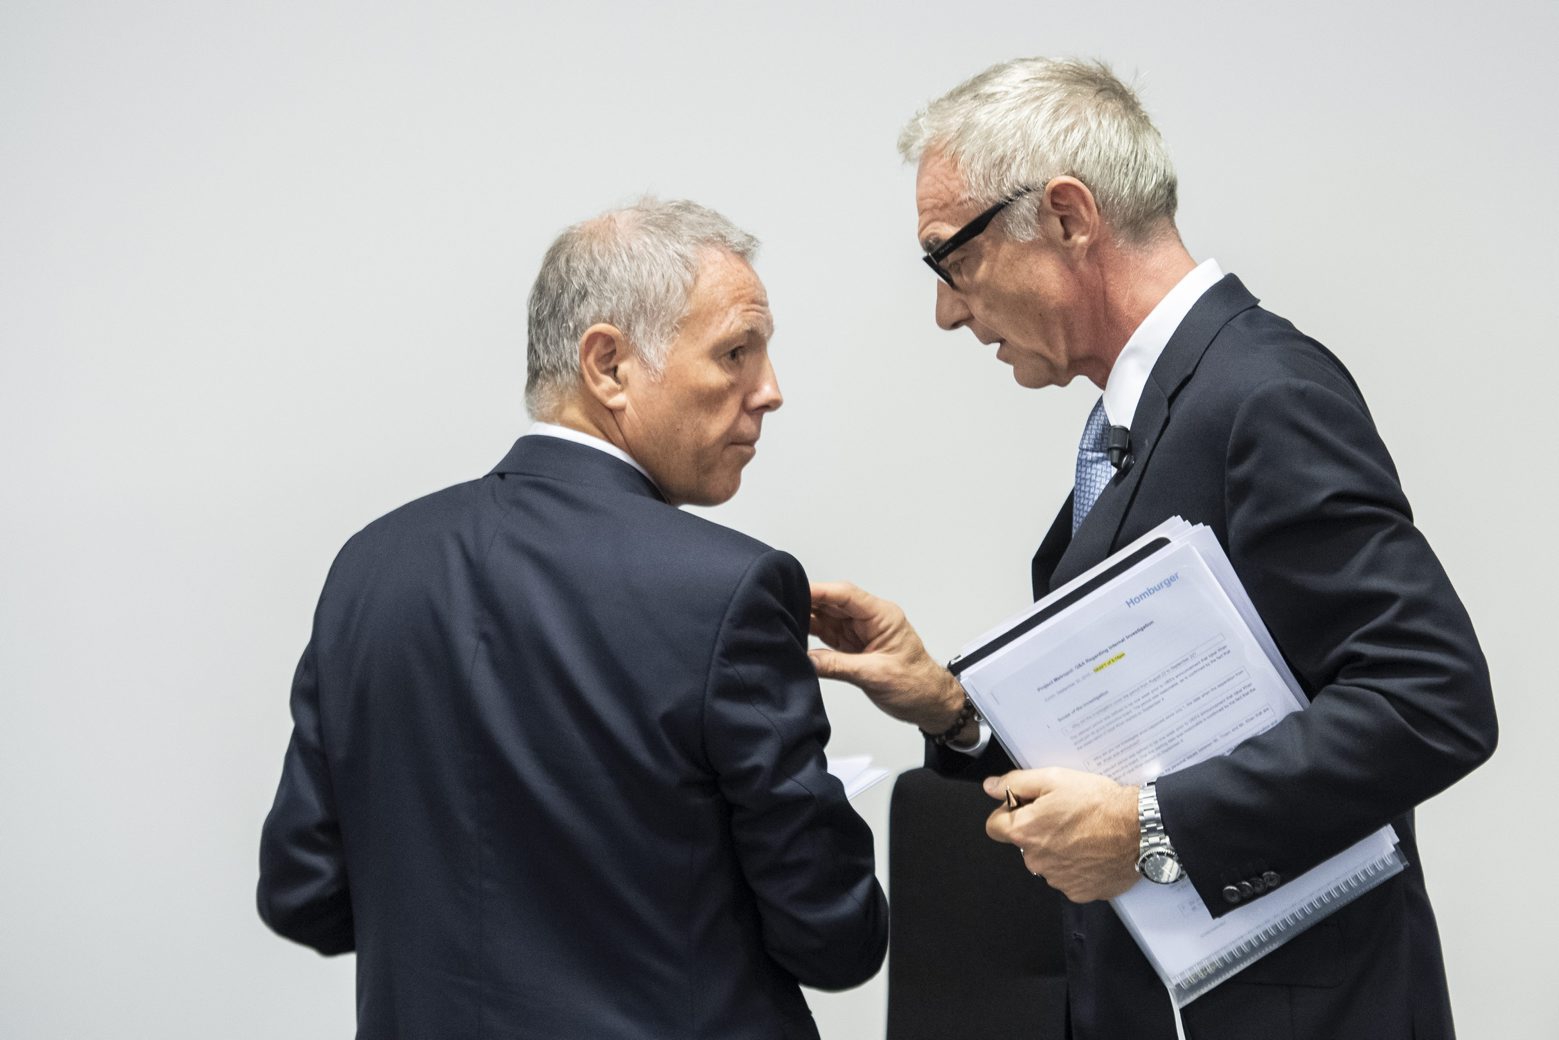 Urs Rohner, president of the board, right, speaks with John Tiner, Member of the Board of Directors, left, after a press conference of the Observation of Iqbal Khan in Zurich, Switzerland, Tuesday, October 1, 2019. (KEYSTONE/Ennio Leanza) SCHWEIZ BANK CREDIT SUISSE